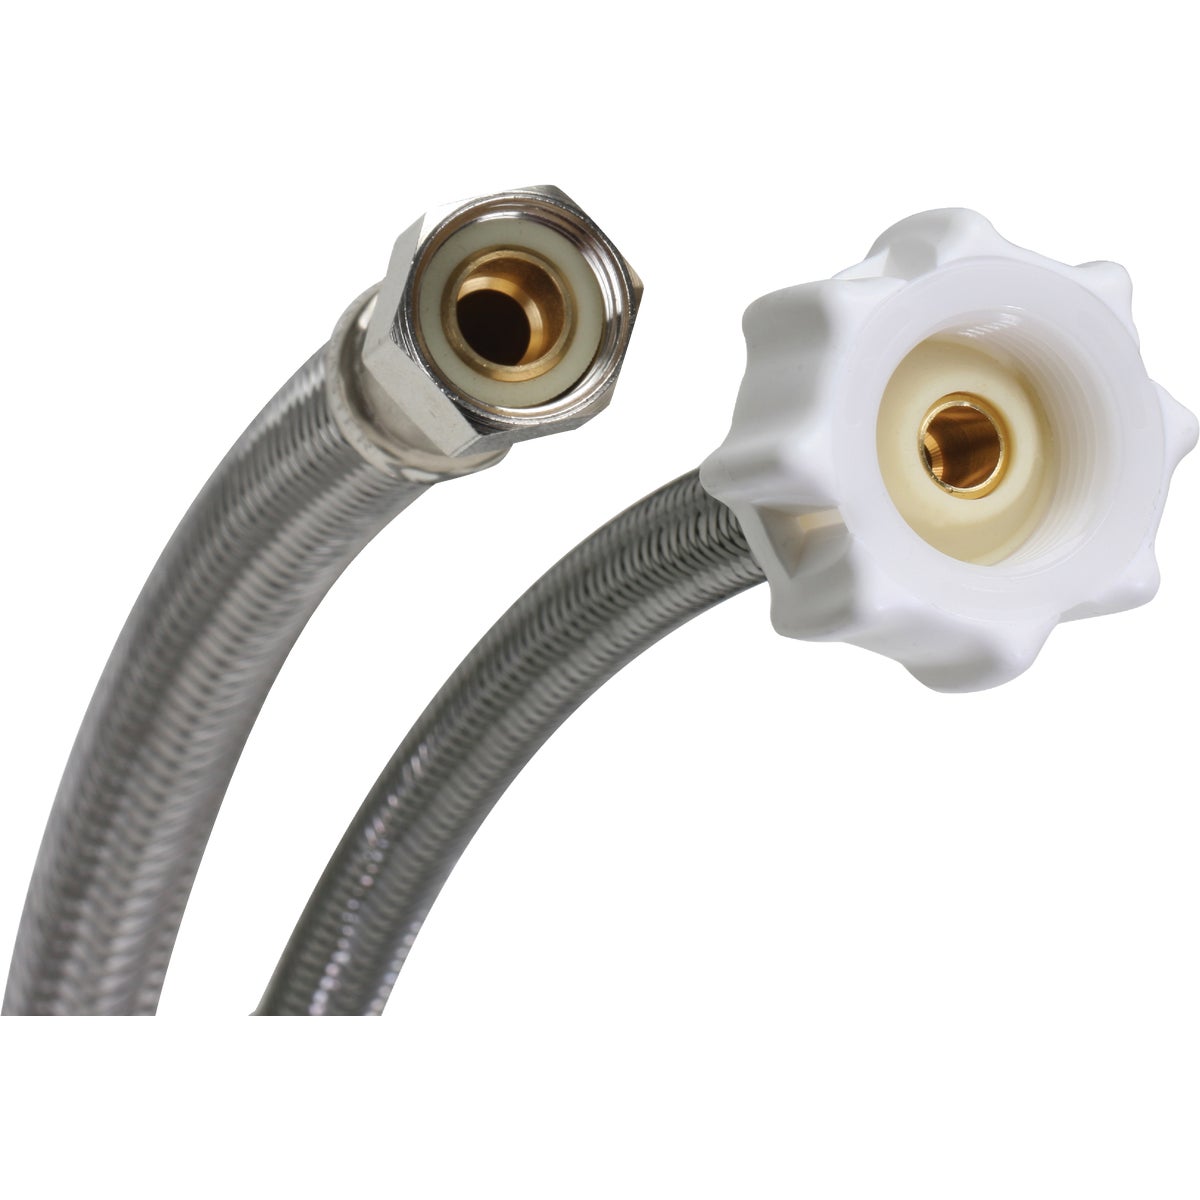 Item 401591, Fluidmaster toilet water supply connectors or water supply lines are built 